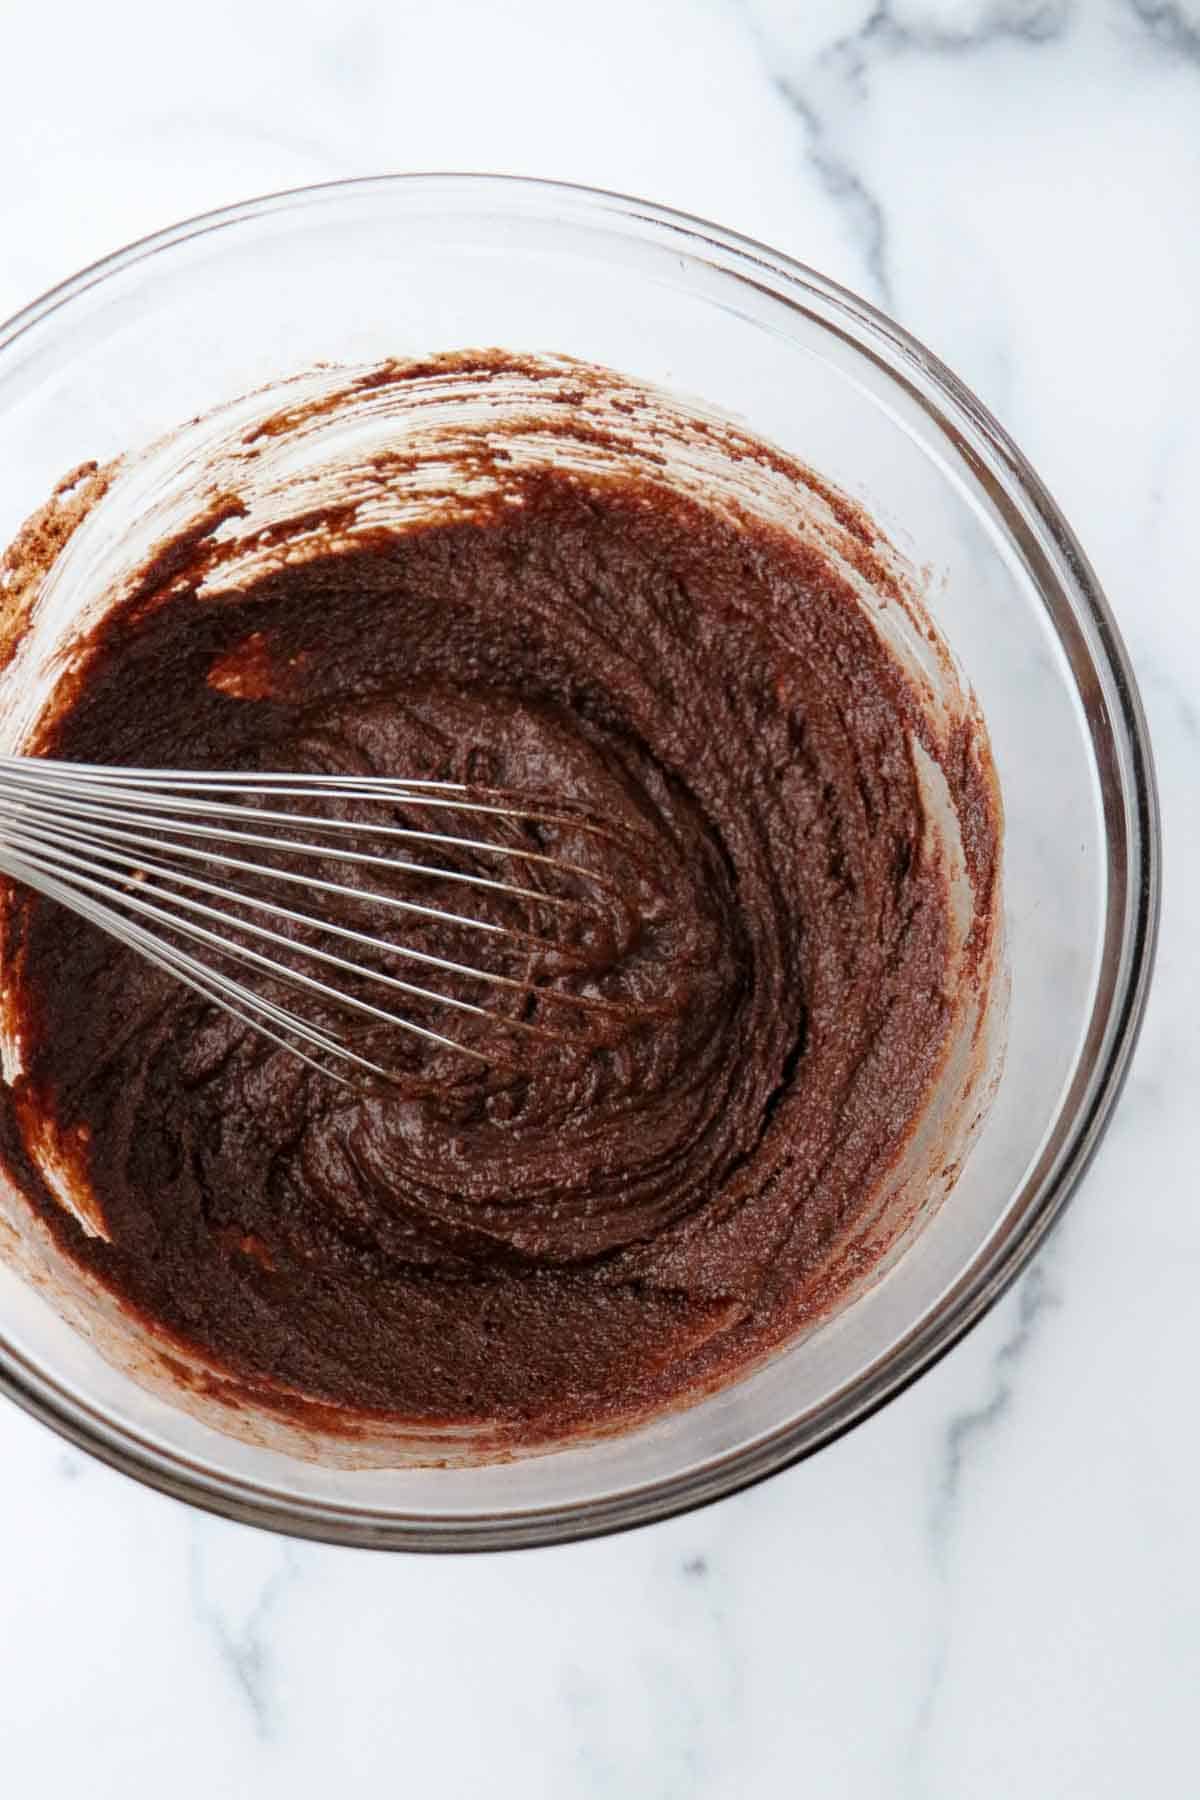 Chocolate cake batter in a glass bowl with a whisk.